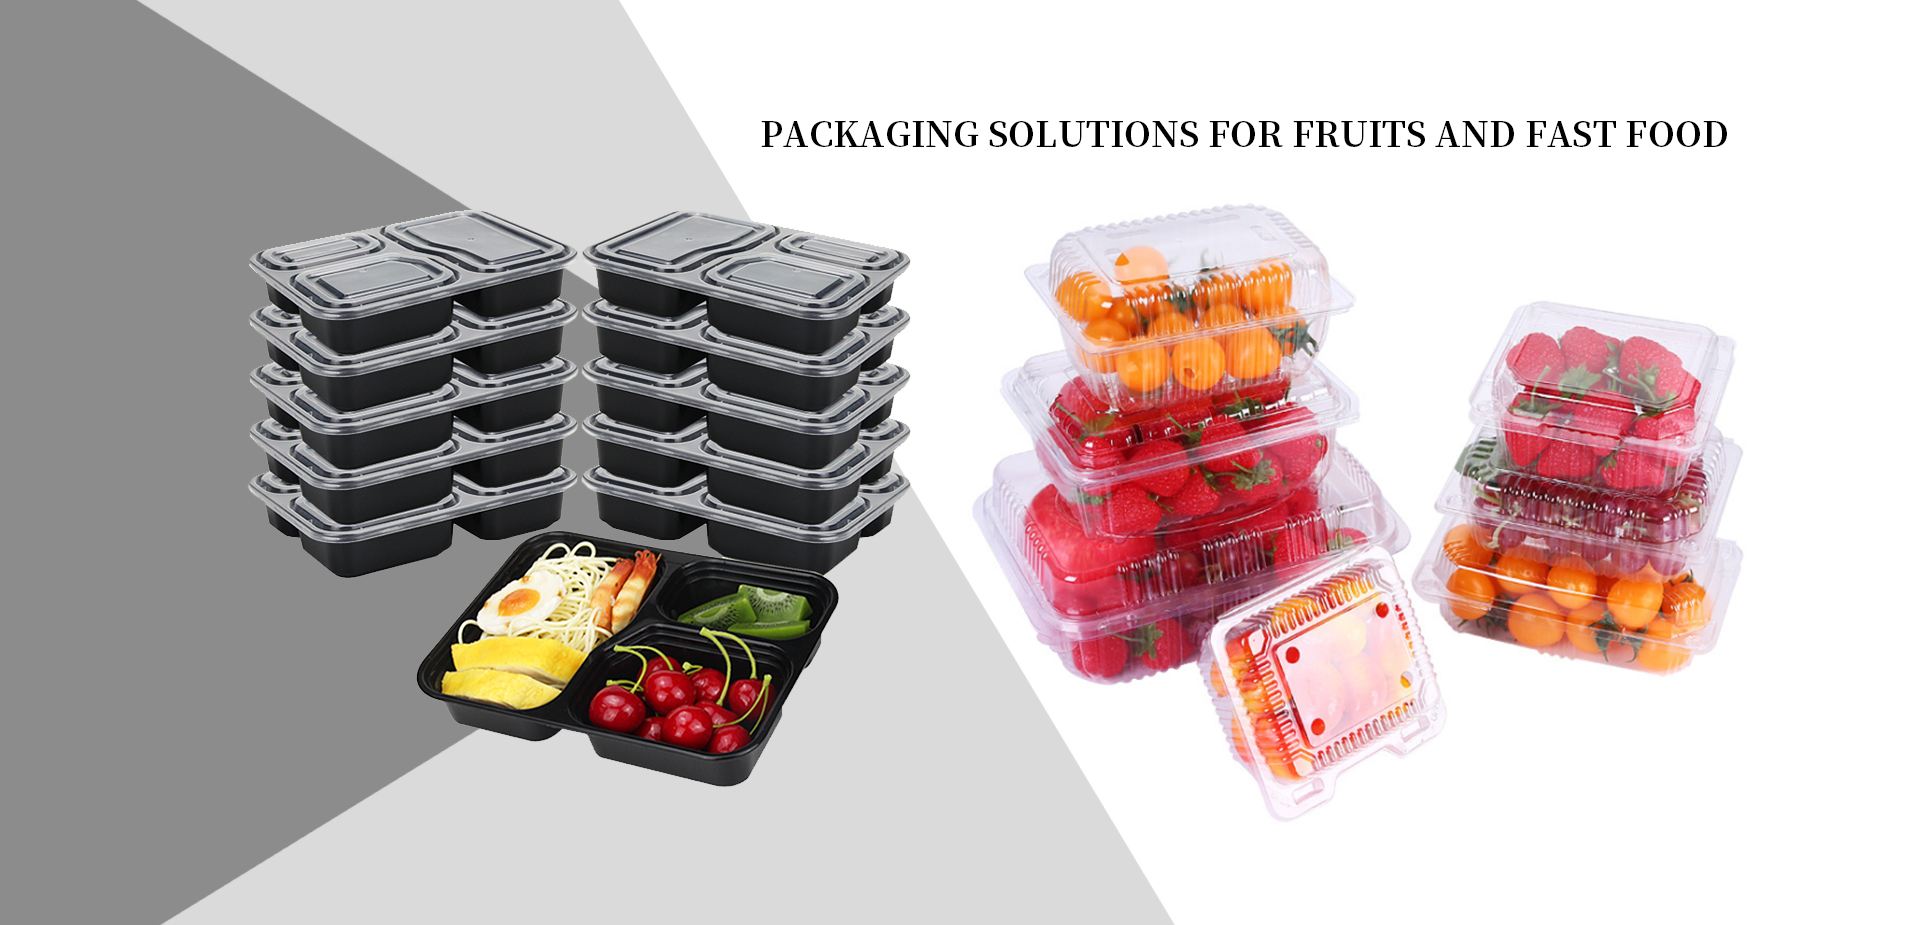 Fruit and vegetable packaging